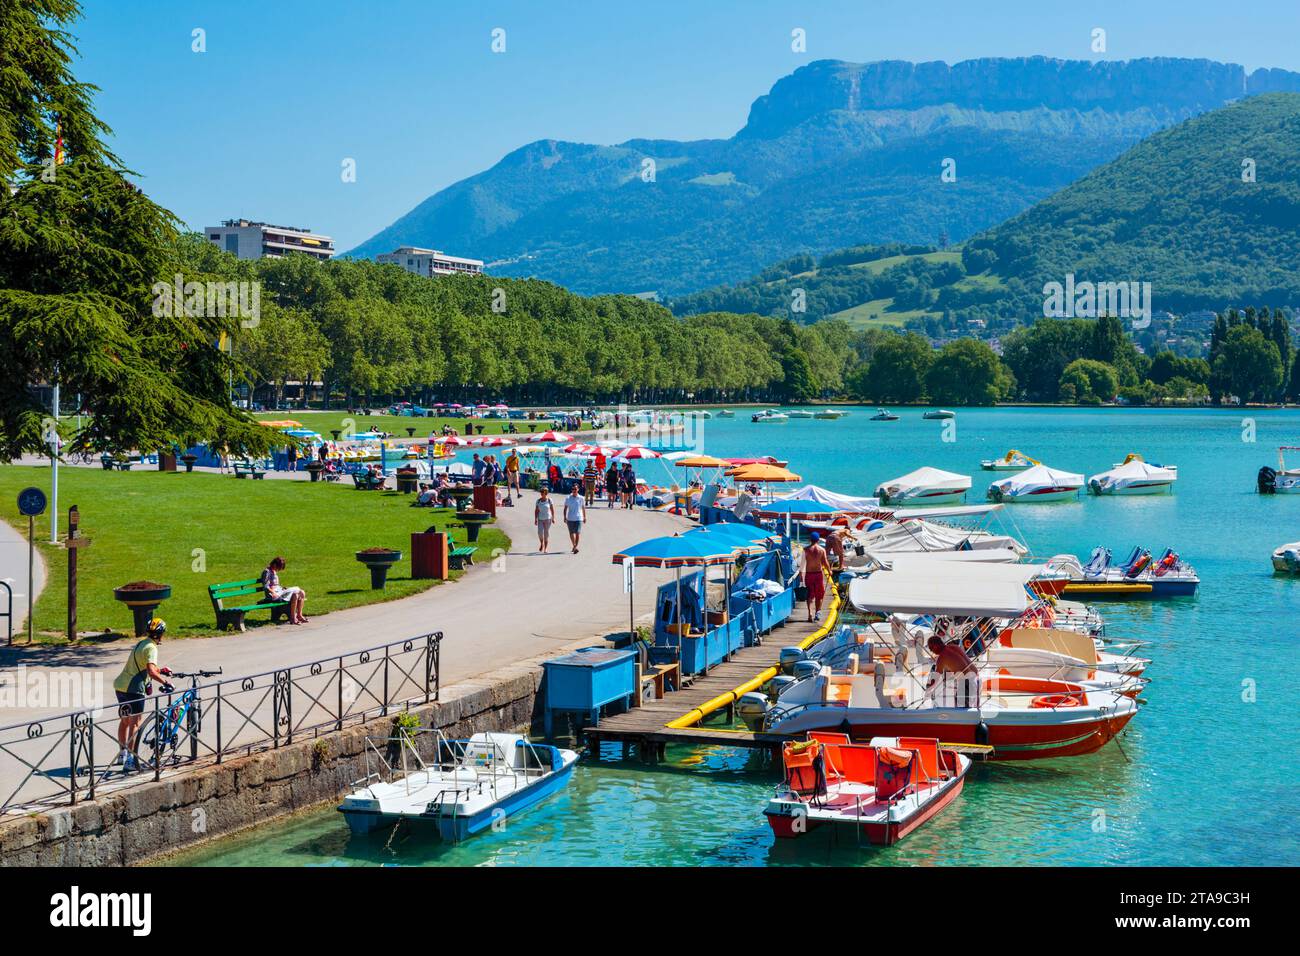 Boats on Lake Annecy, Annecy, Rhone-Alpes, France Stock Photo